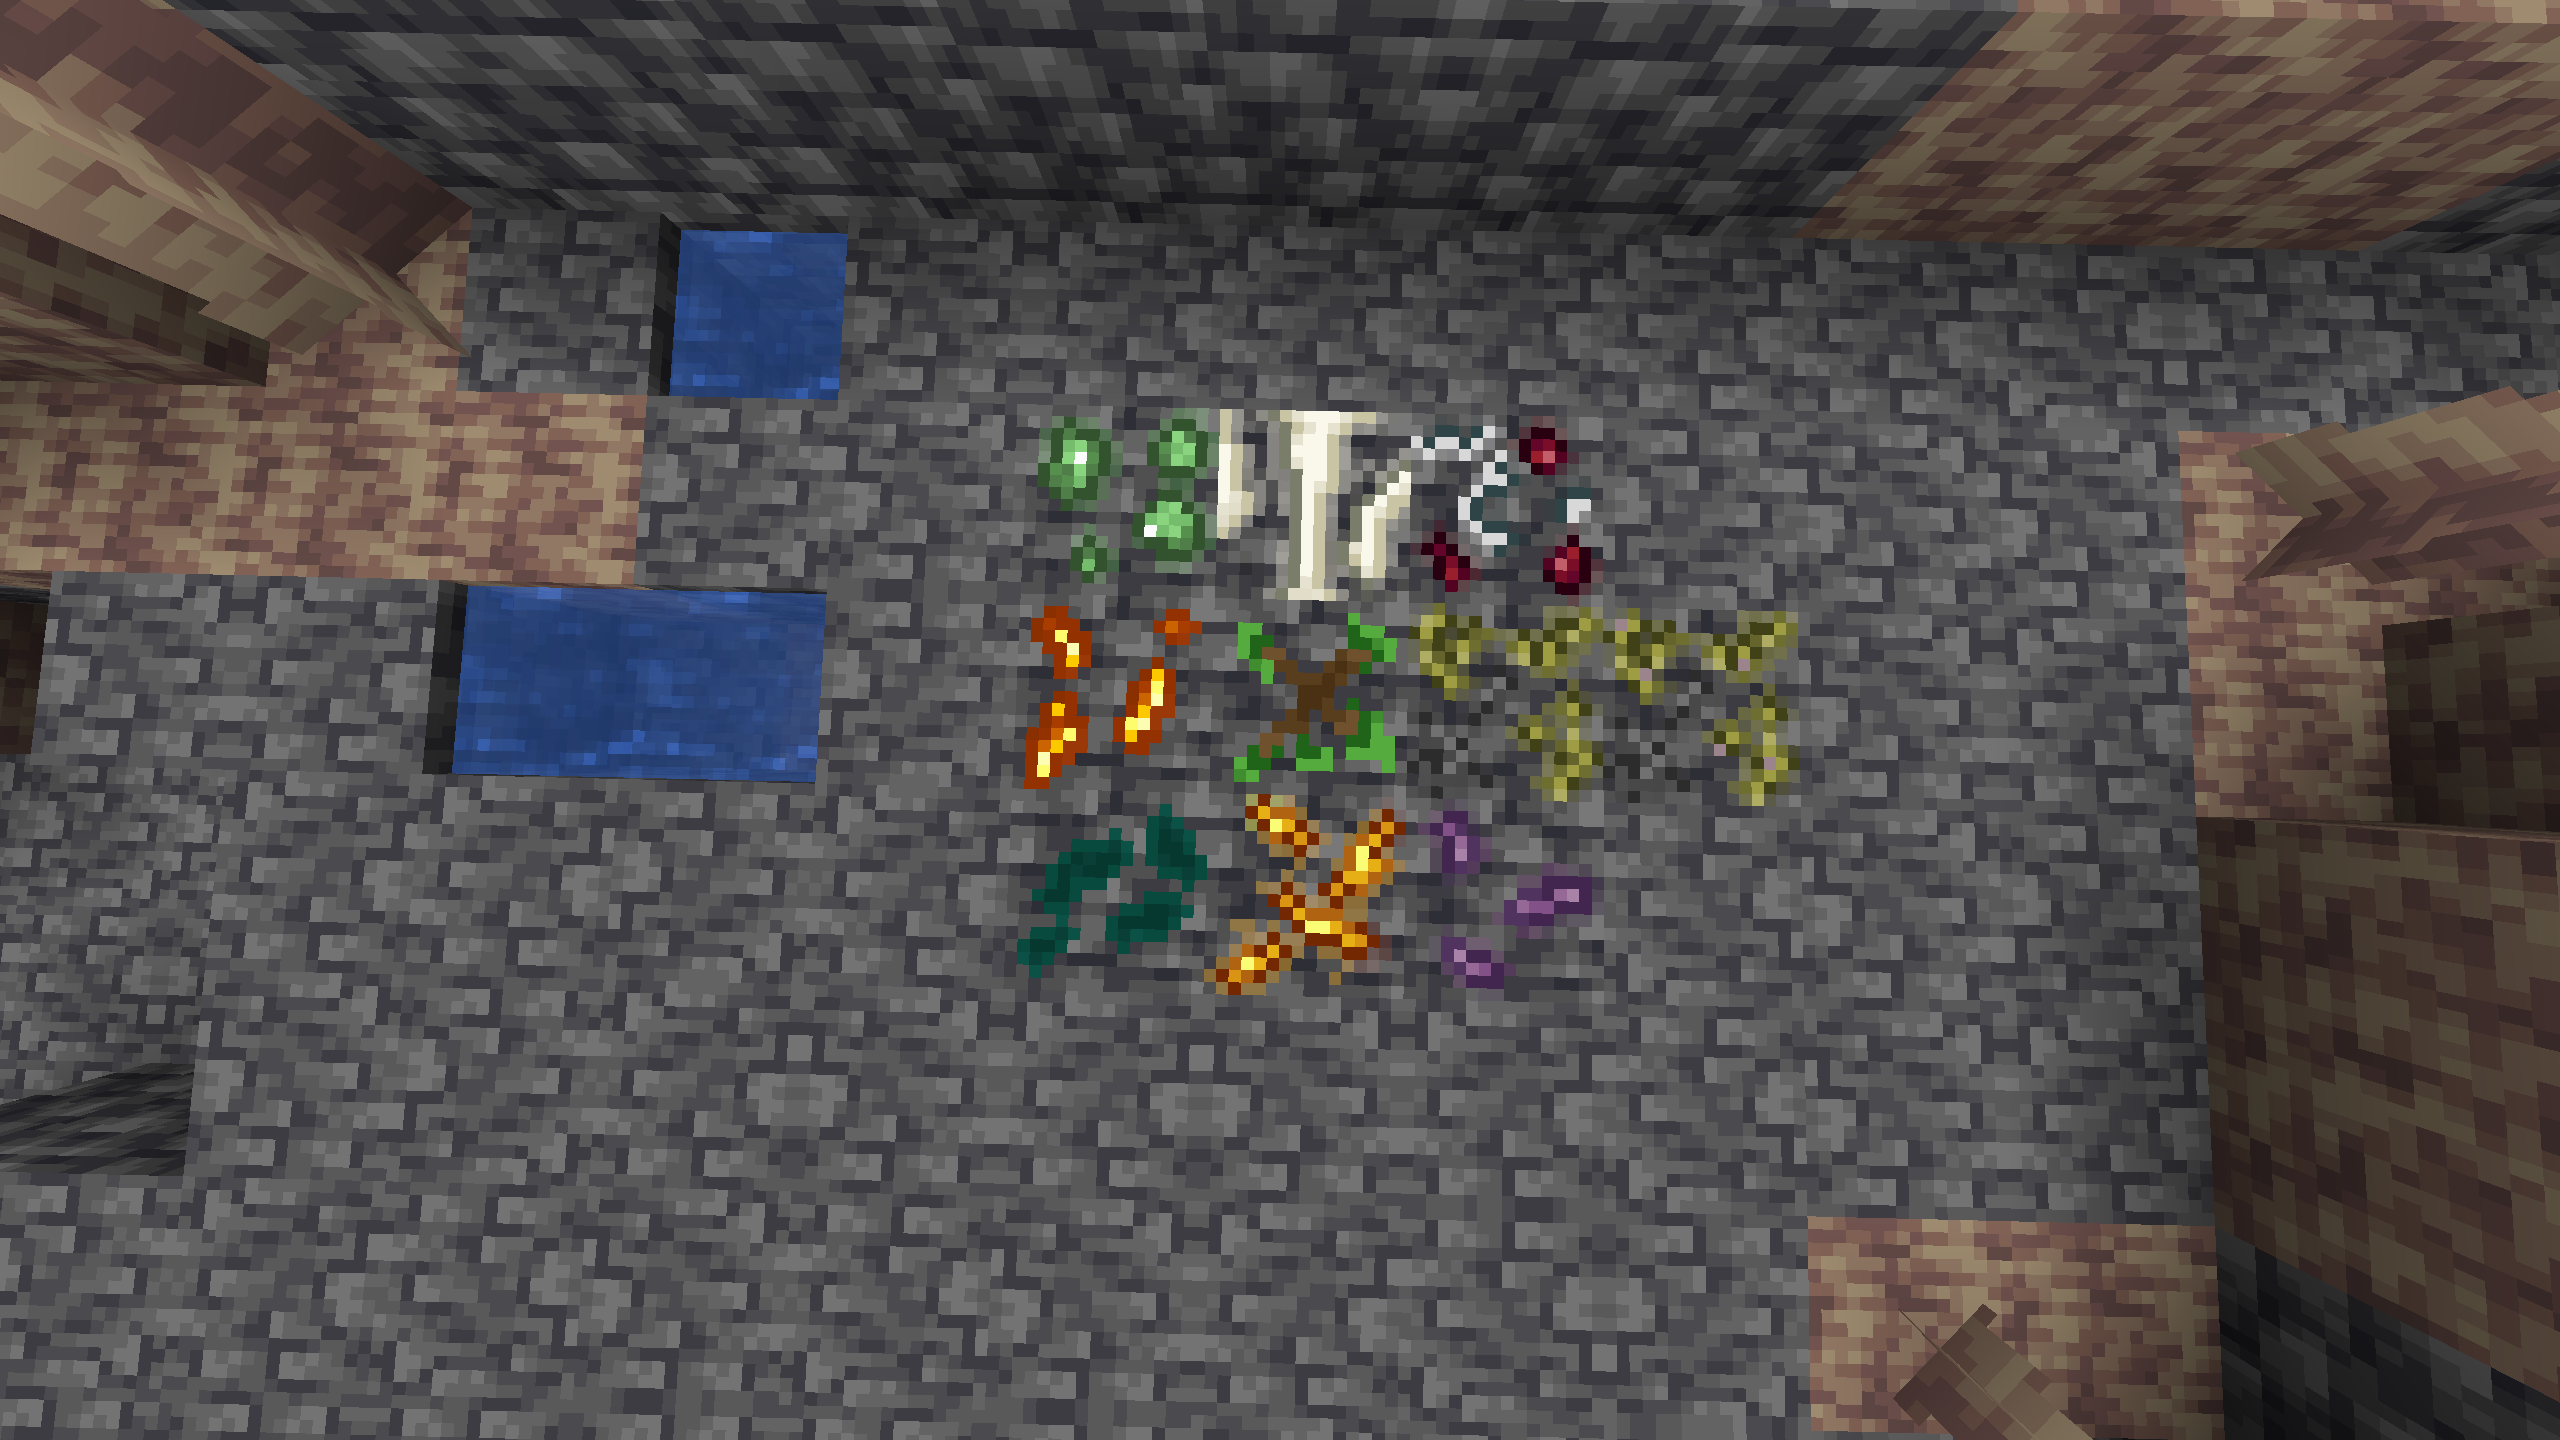 All the ores available on the 0.1.1 version